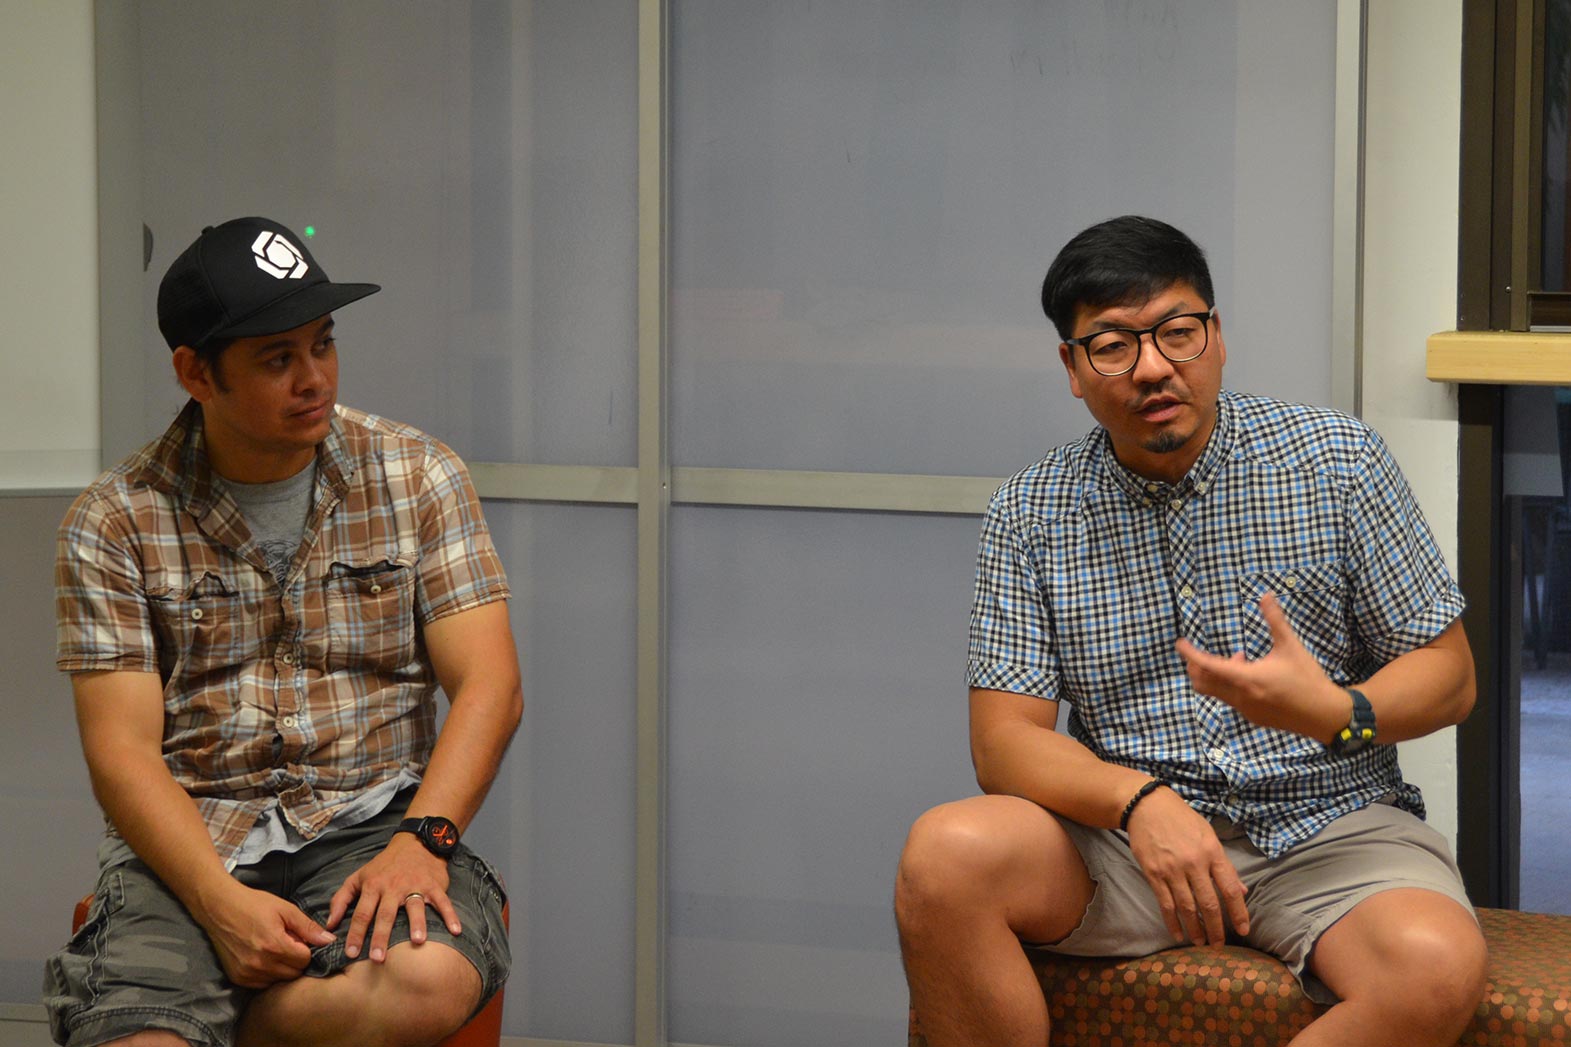 Benson Lee, director of Seoul Searching speaking to students in the Academy for Creative Media at the University of Hawaii at Manoa.